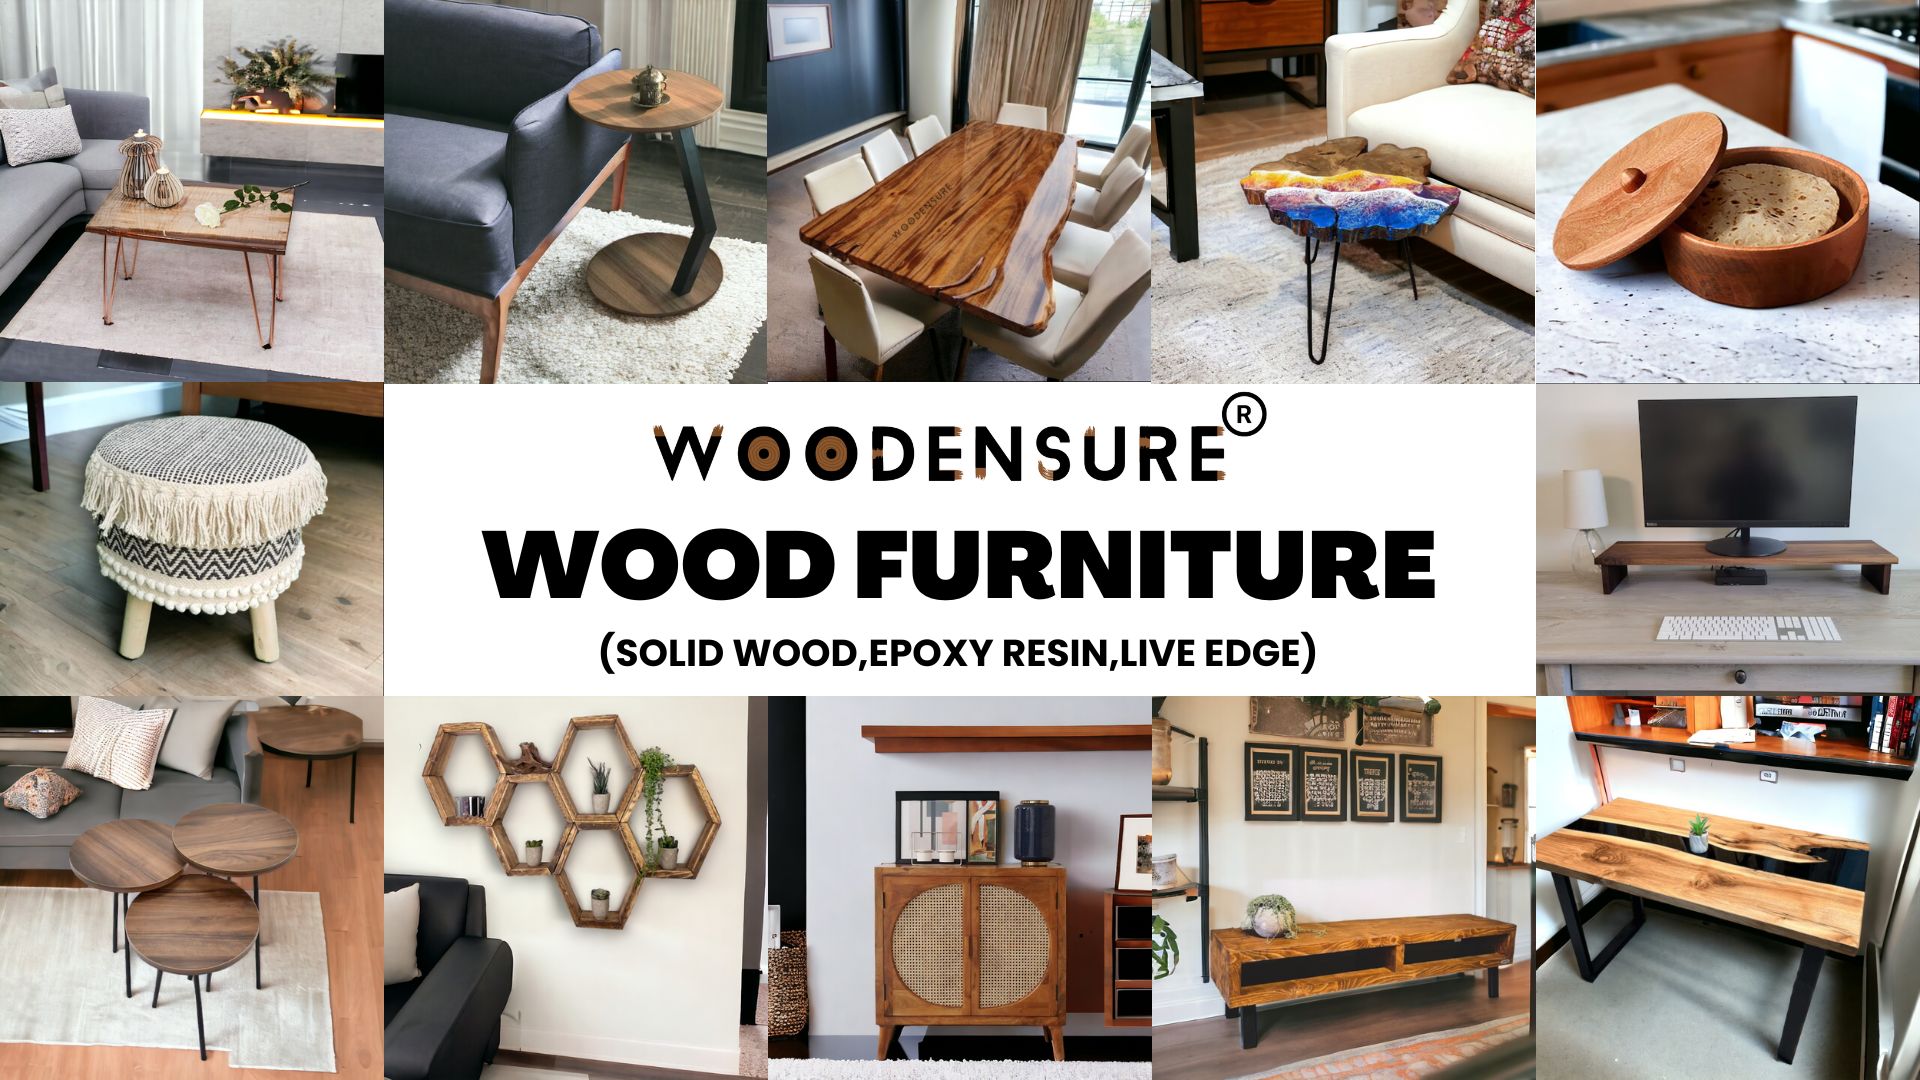 Wooden Furniture Online: Your Guide to Finding the Perfect Wood Furniture